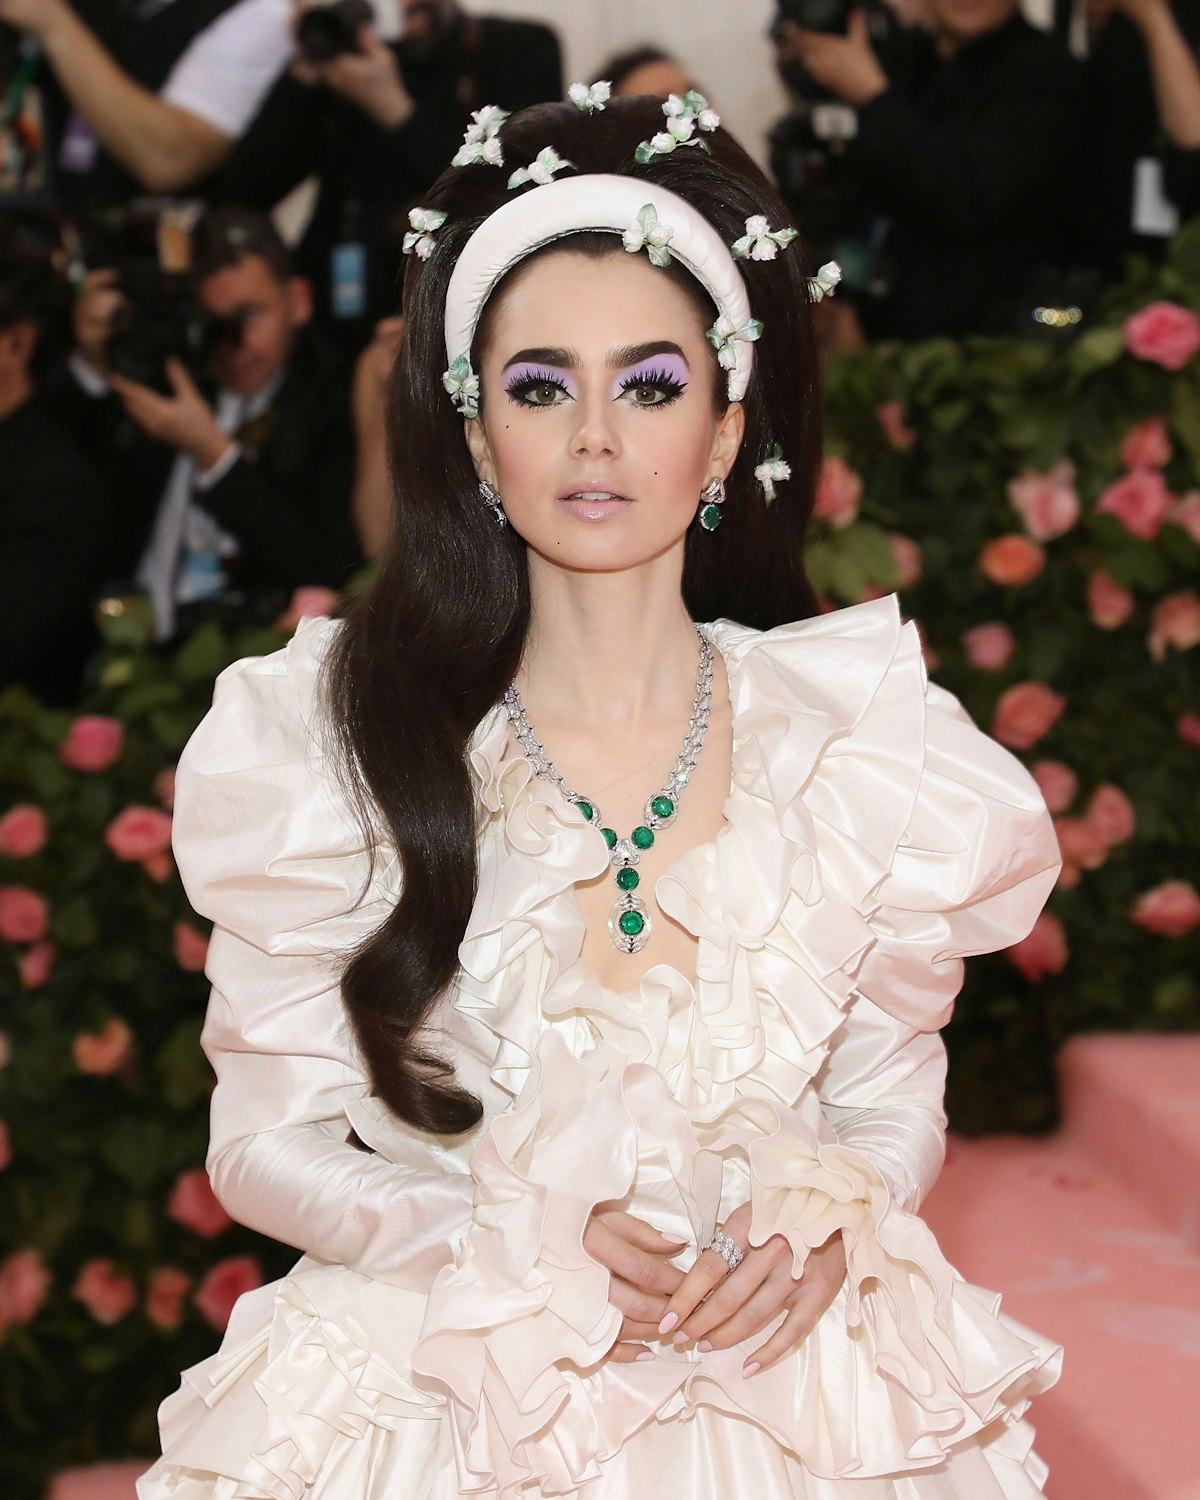 Lily Collins channeled Priscilla Presley's bouffant with added accessories.